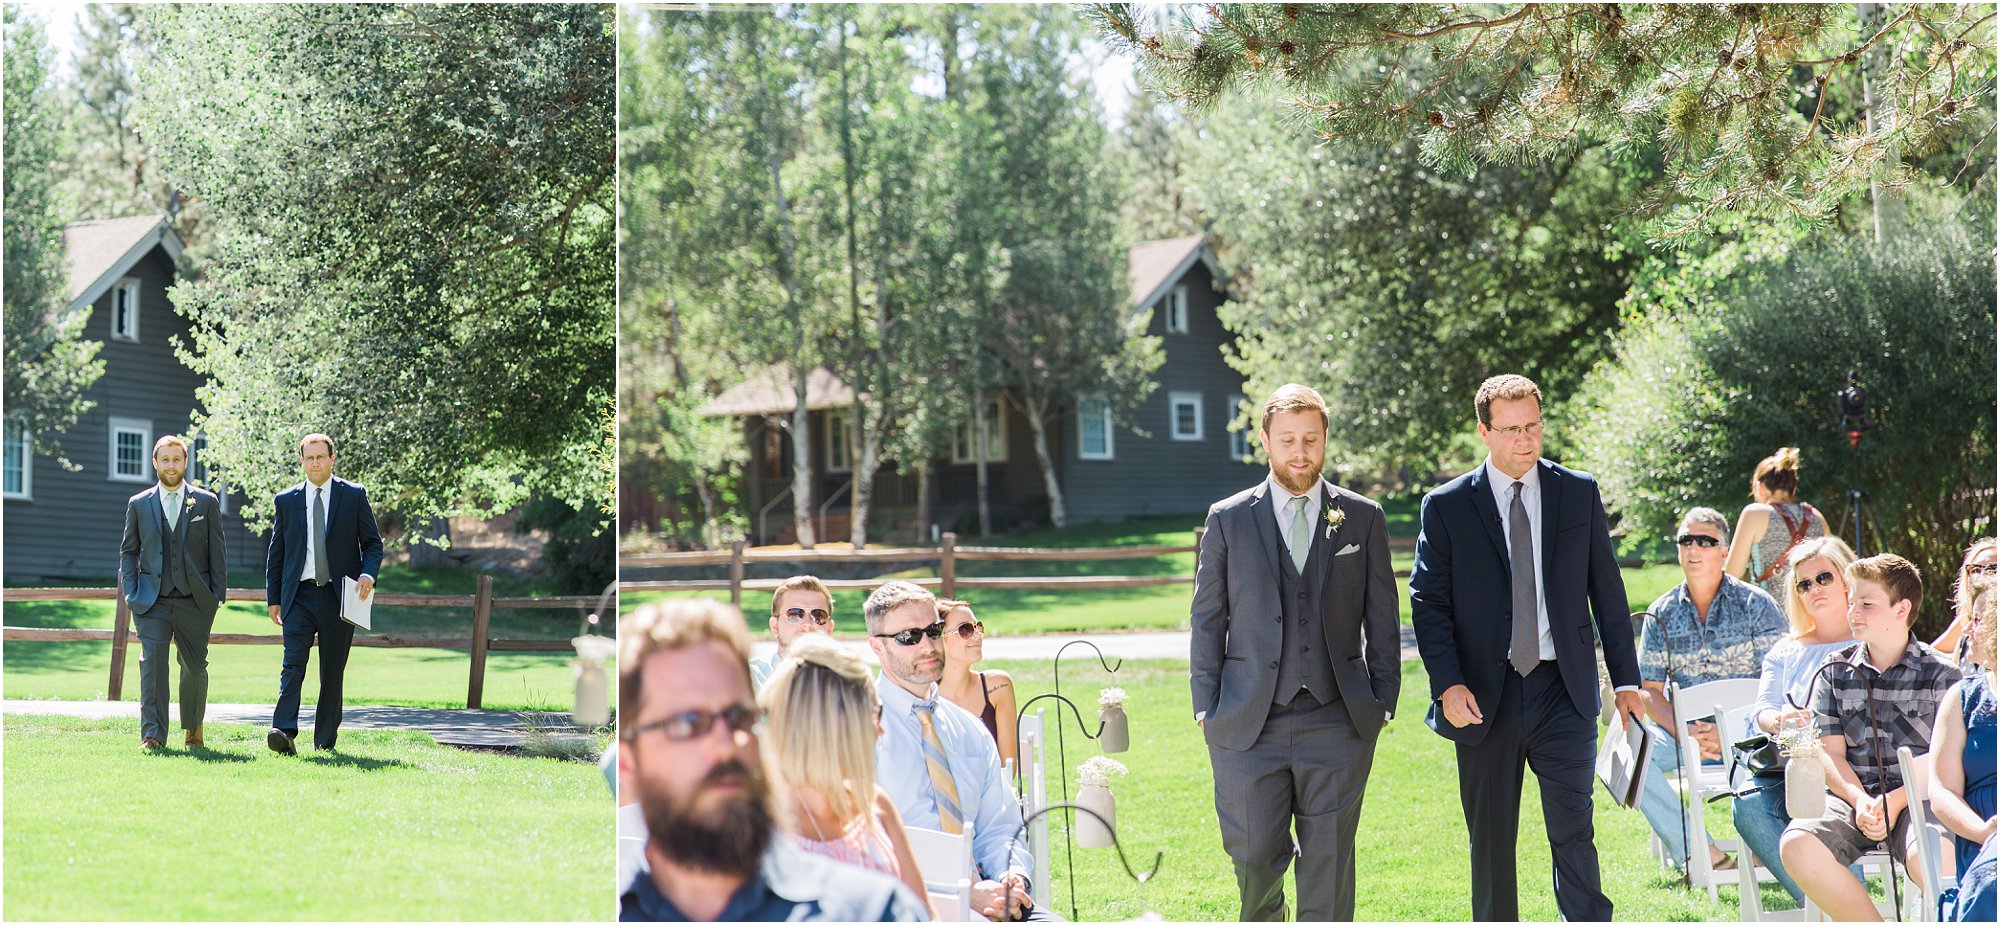 A gorgeous vintage rustic chic Bend wedding at Aspen Hall. | Erica Swantek Photography